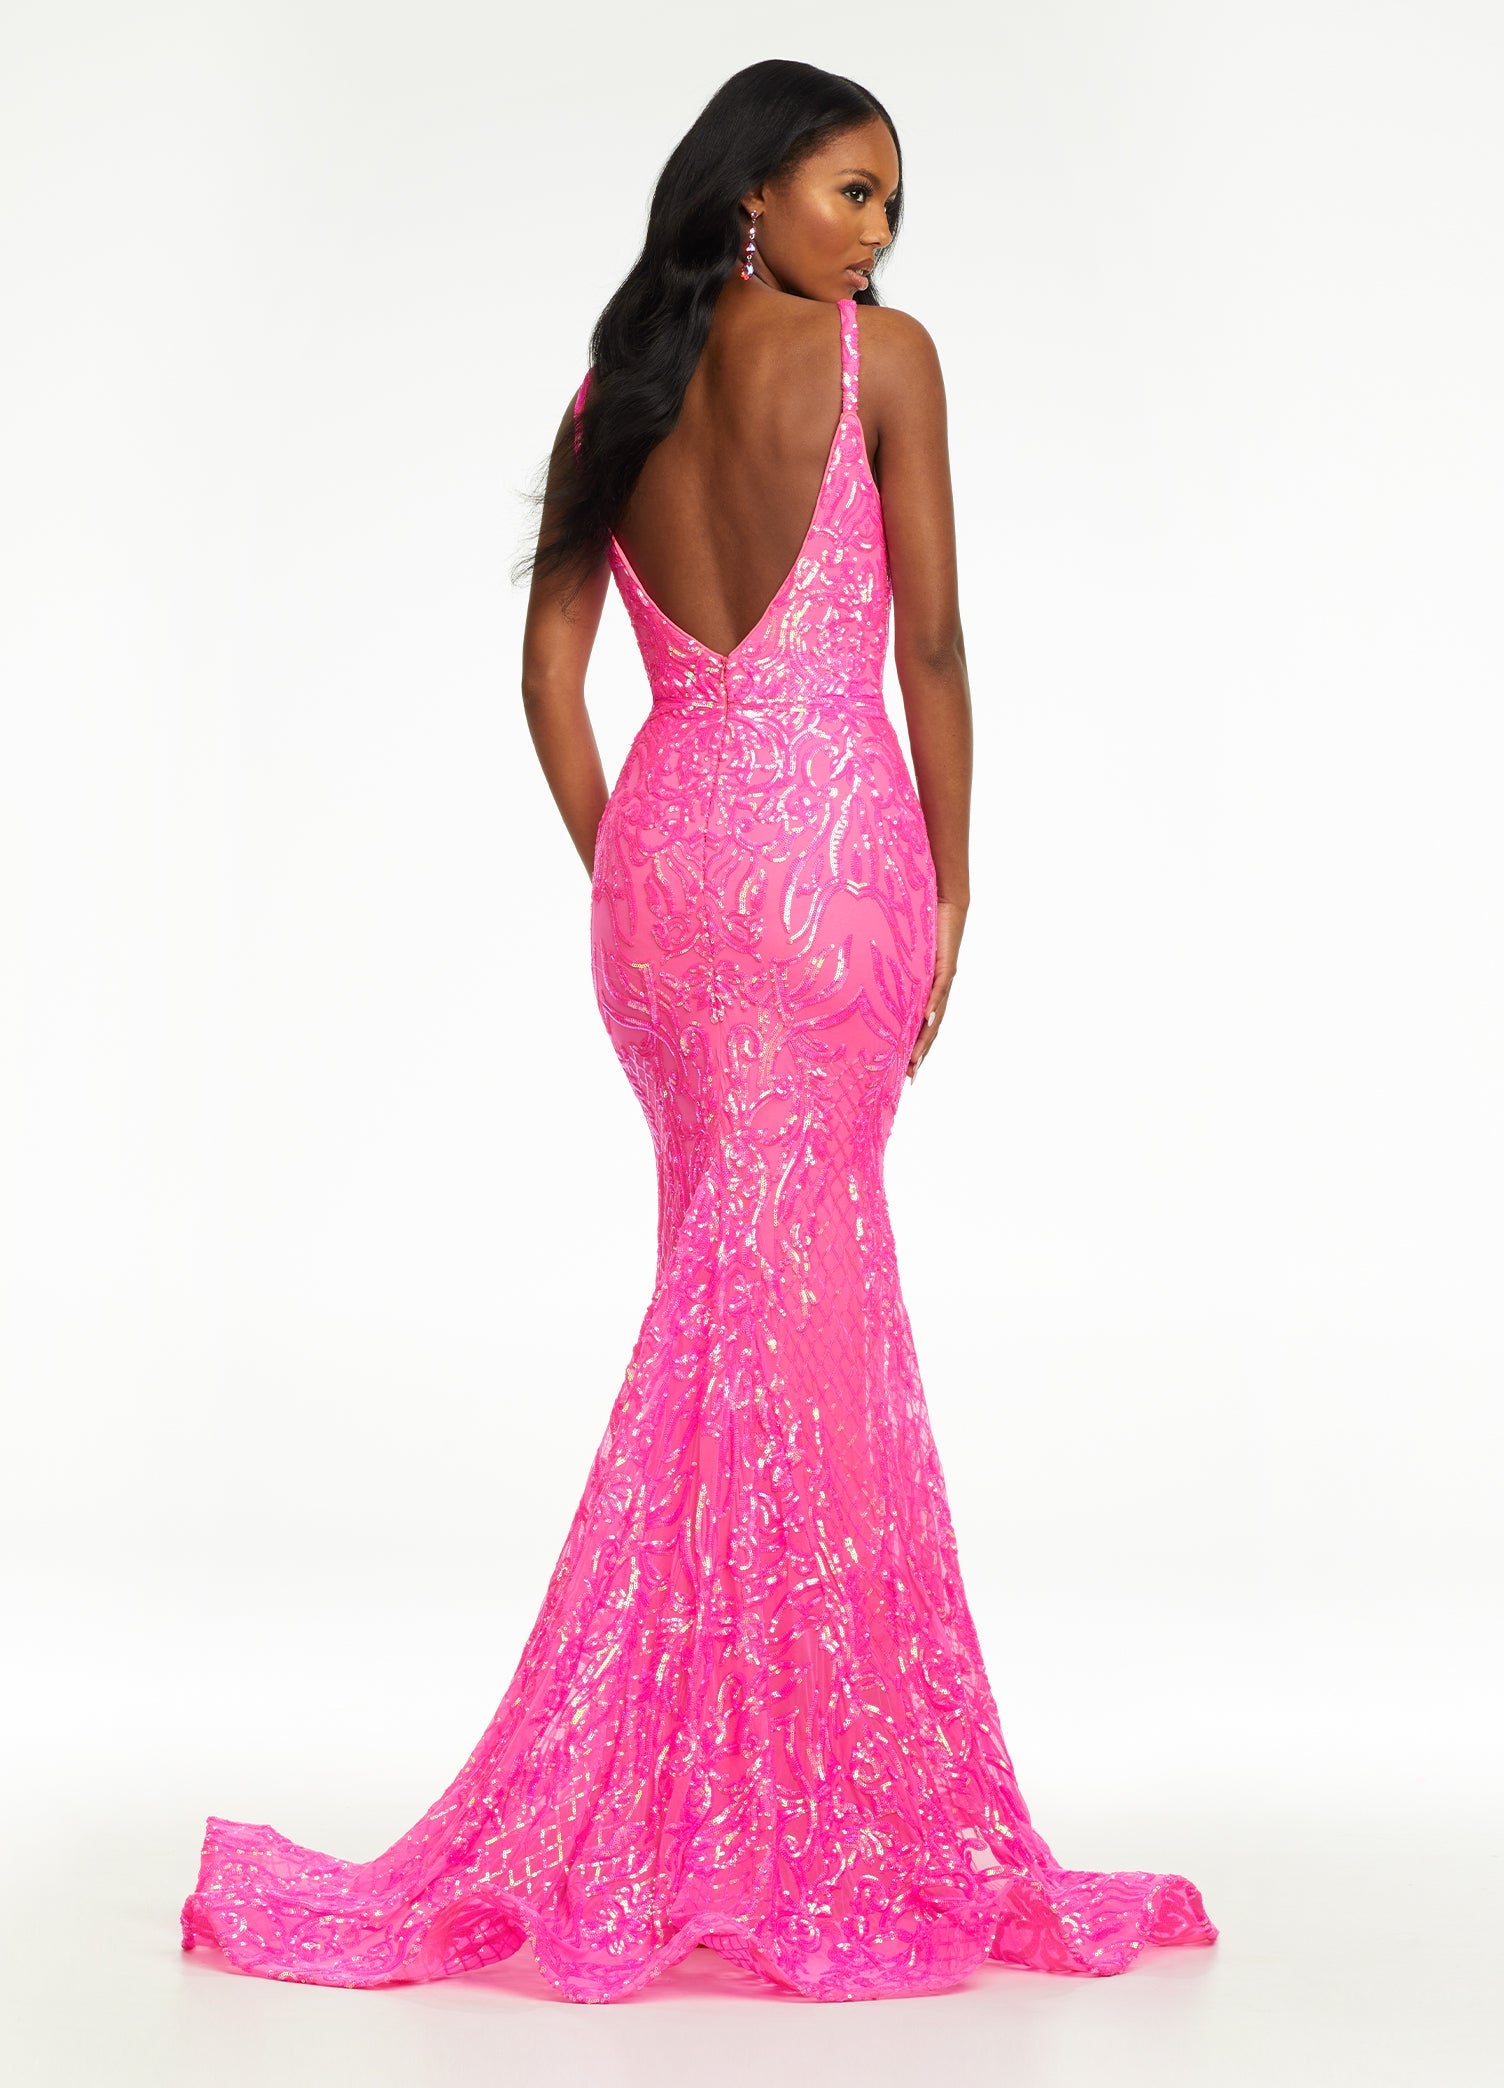 hot pink sparkly dress